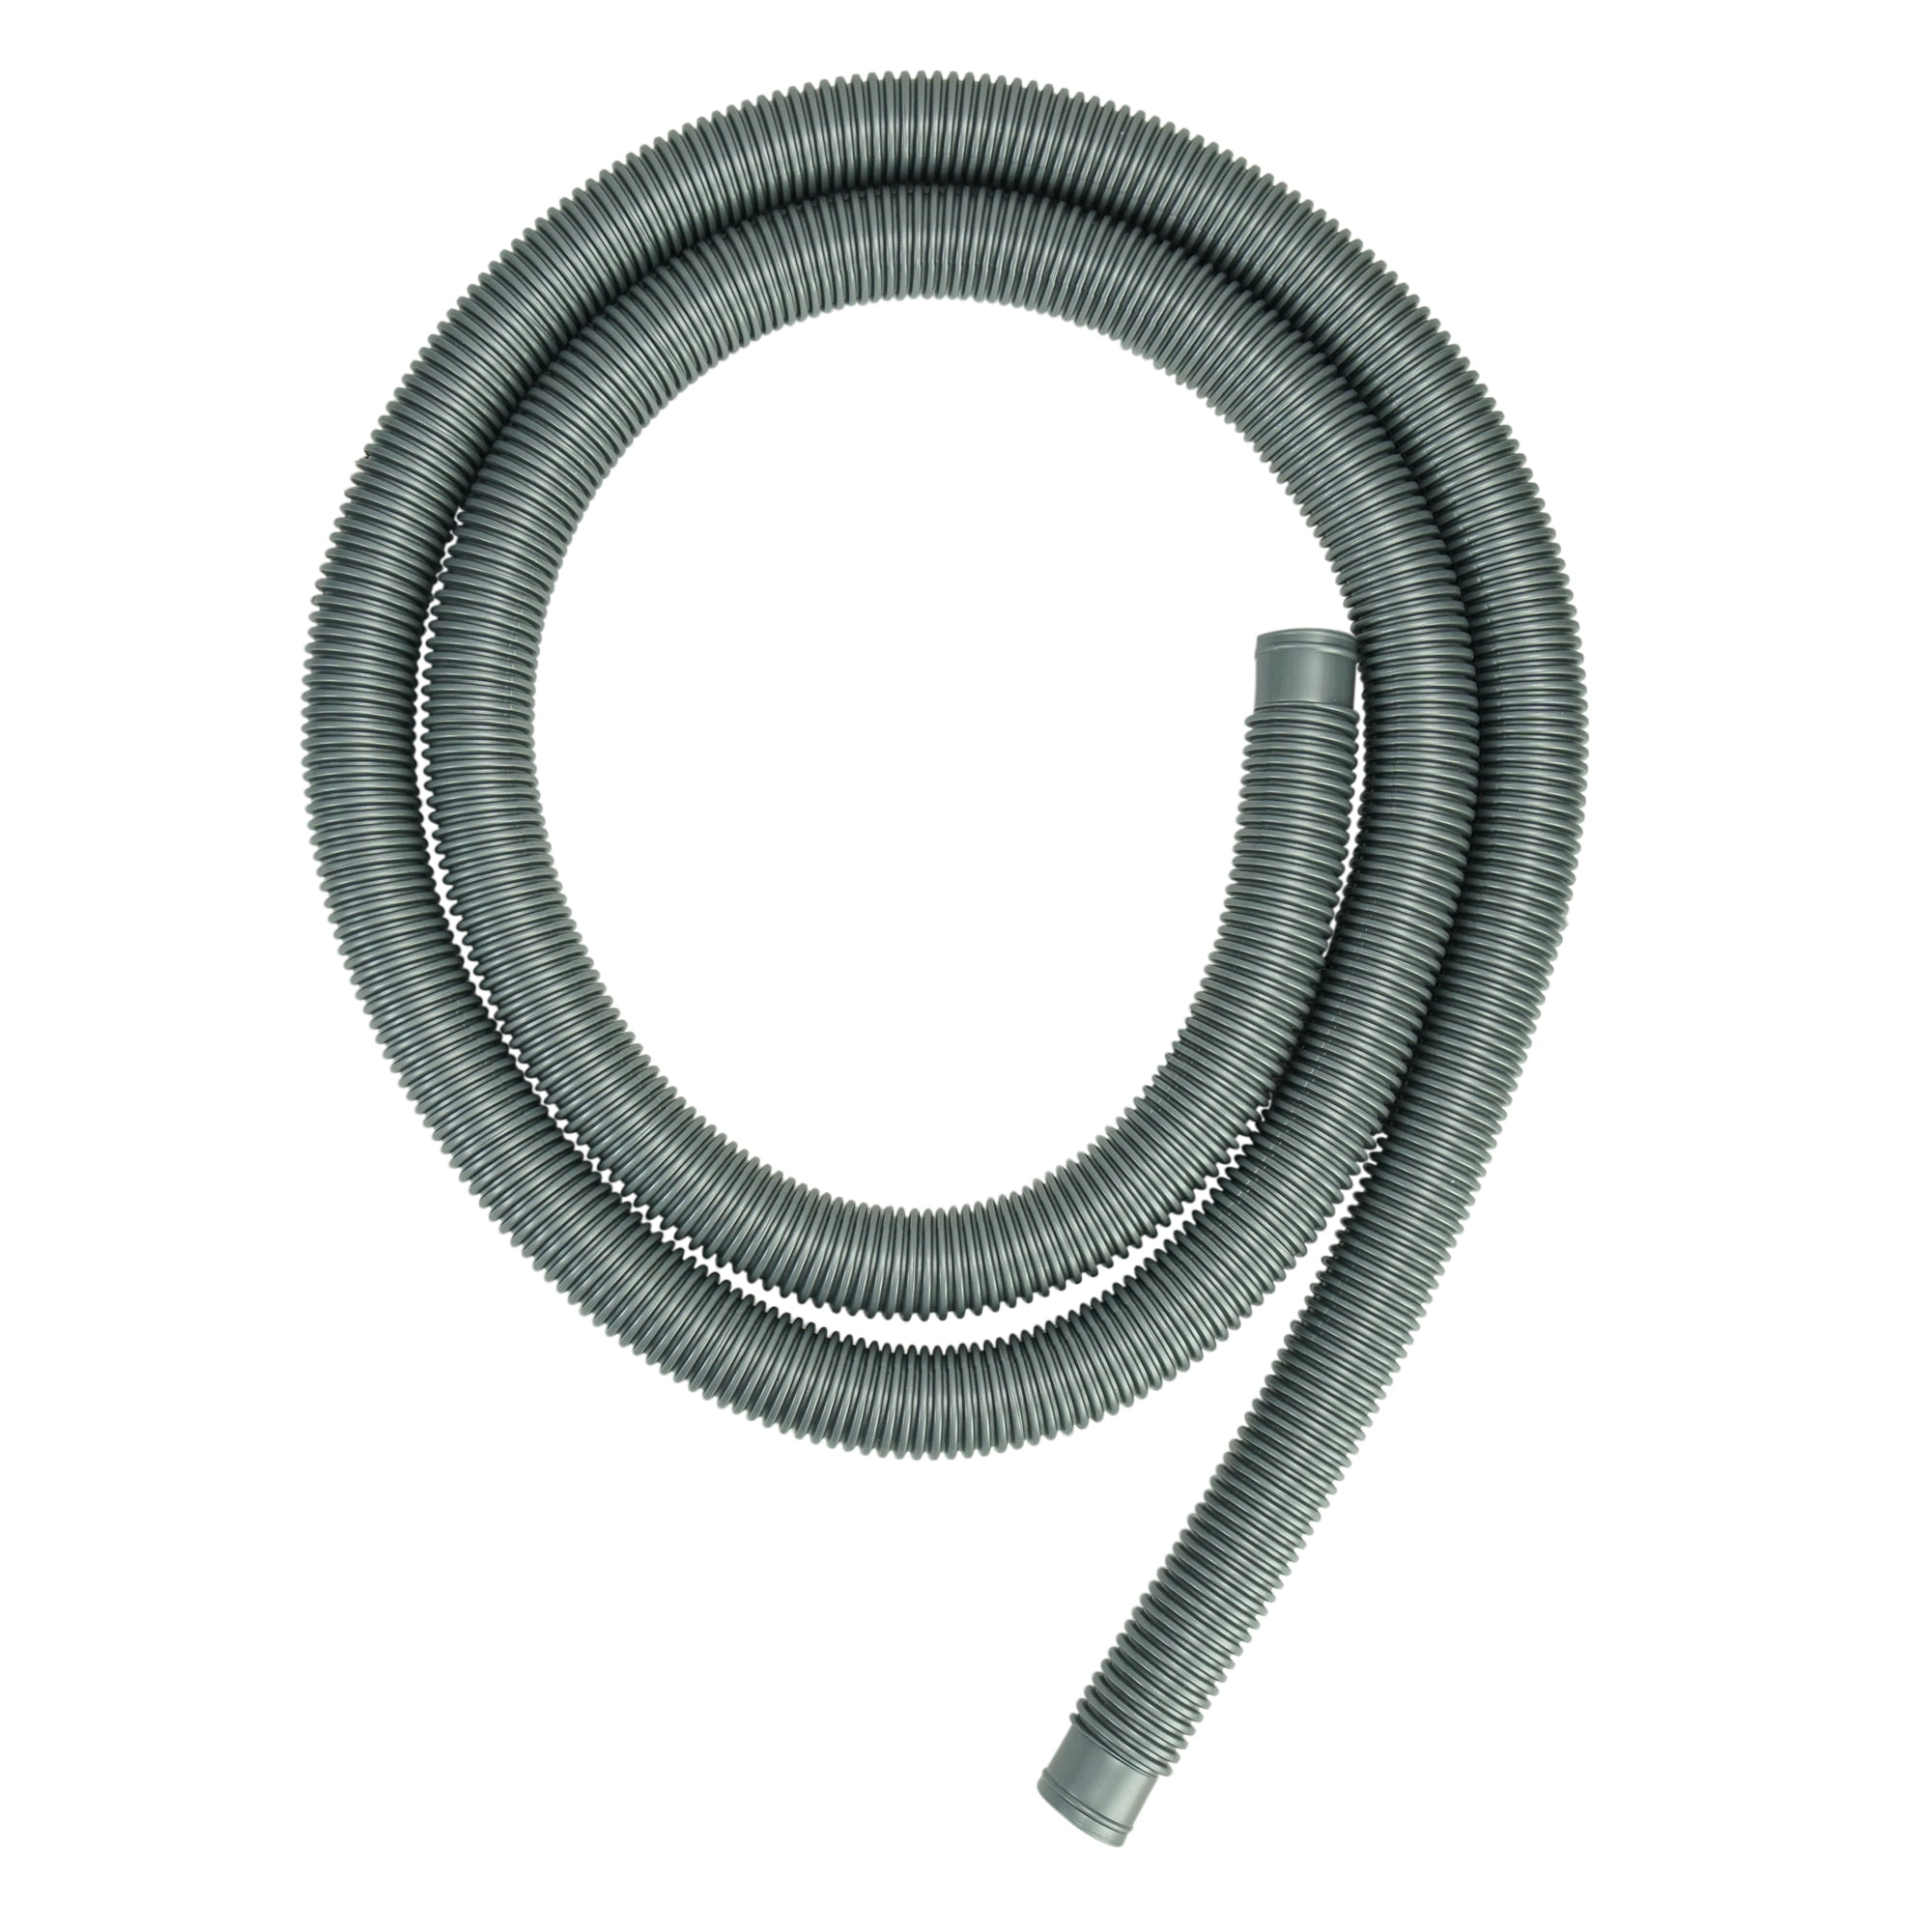 JED Pool Tools 1 1/2" x 3' Filter Hose 60-345-03